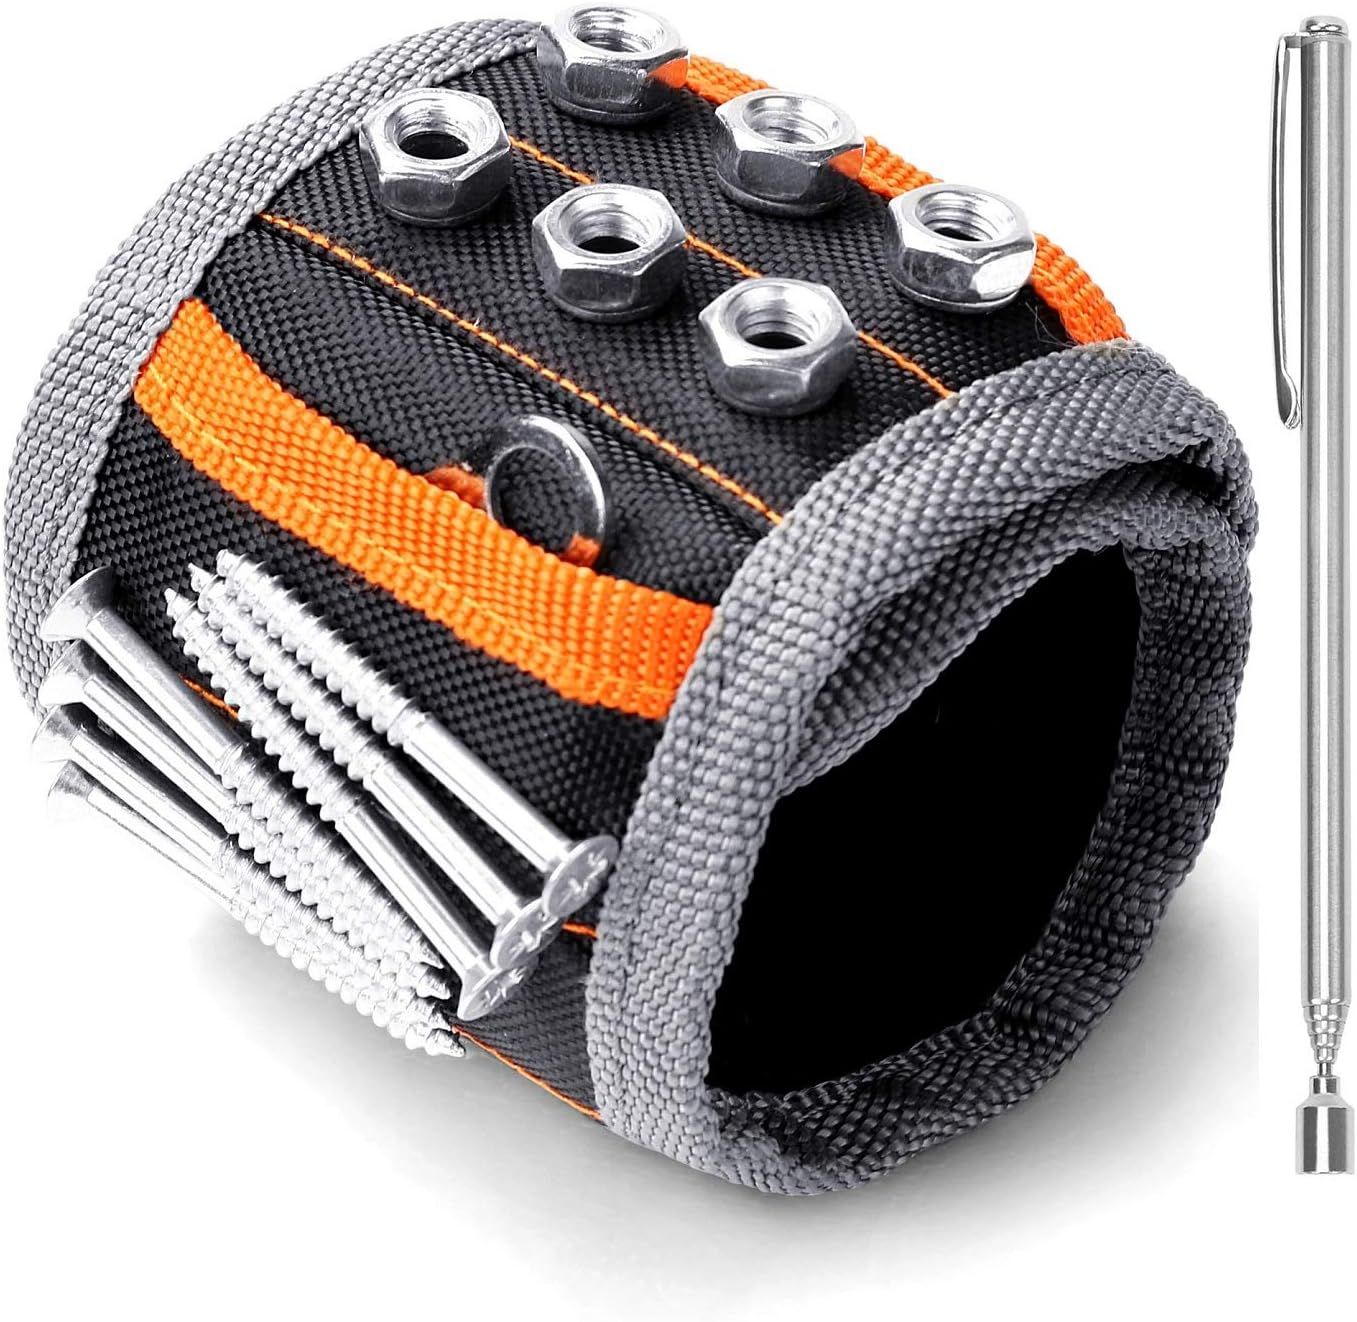 HORUSDY Magnetic Wristband, for Dad, with Strong Magnets for Holding Screws, Nails, Drilling Bits... | Amazon (US)